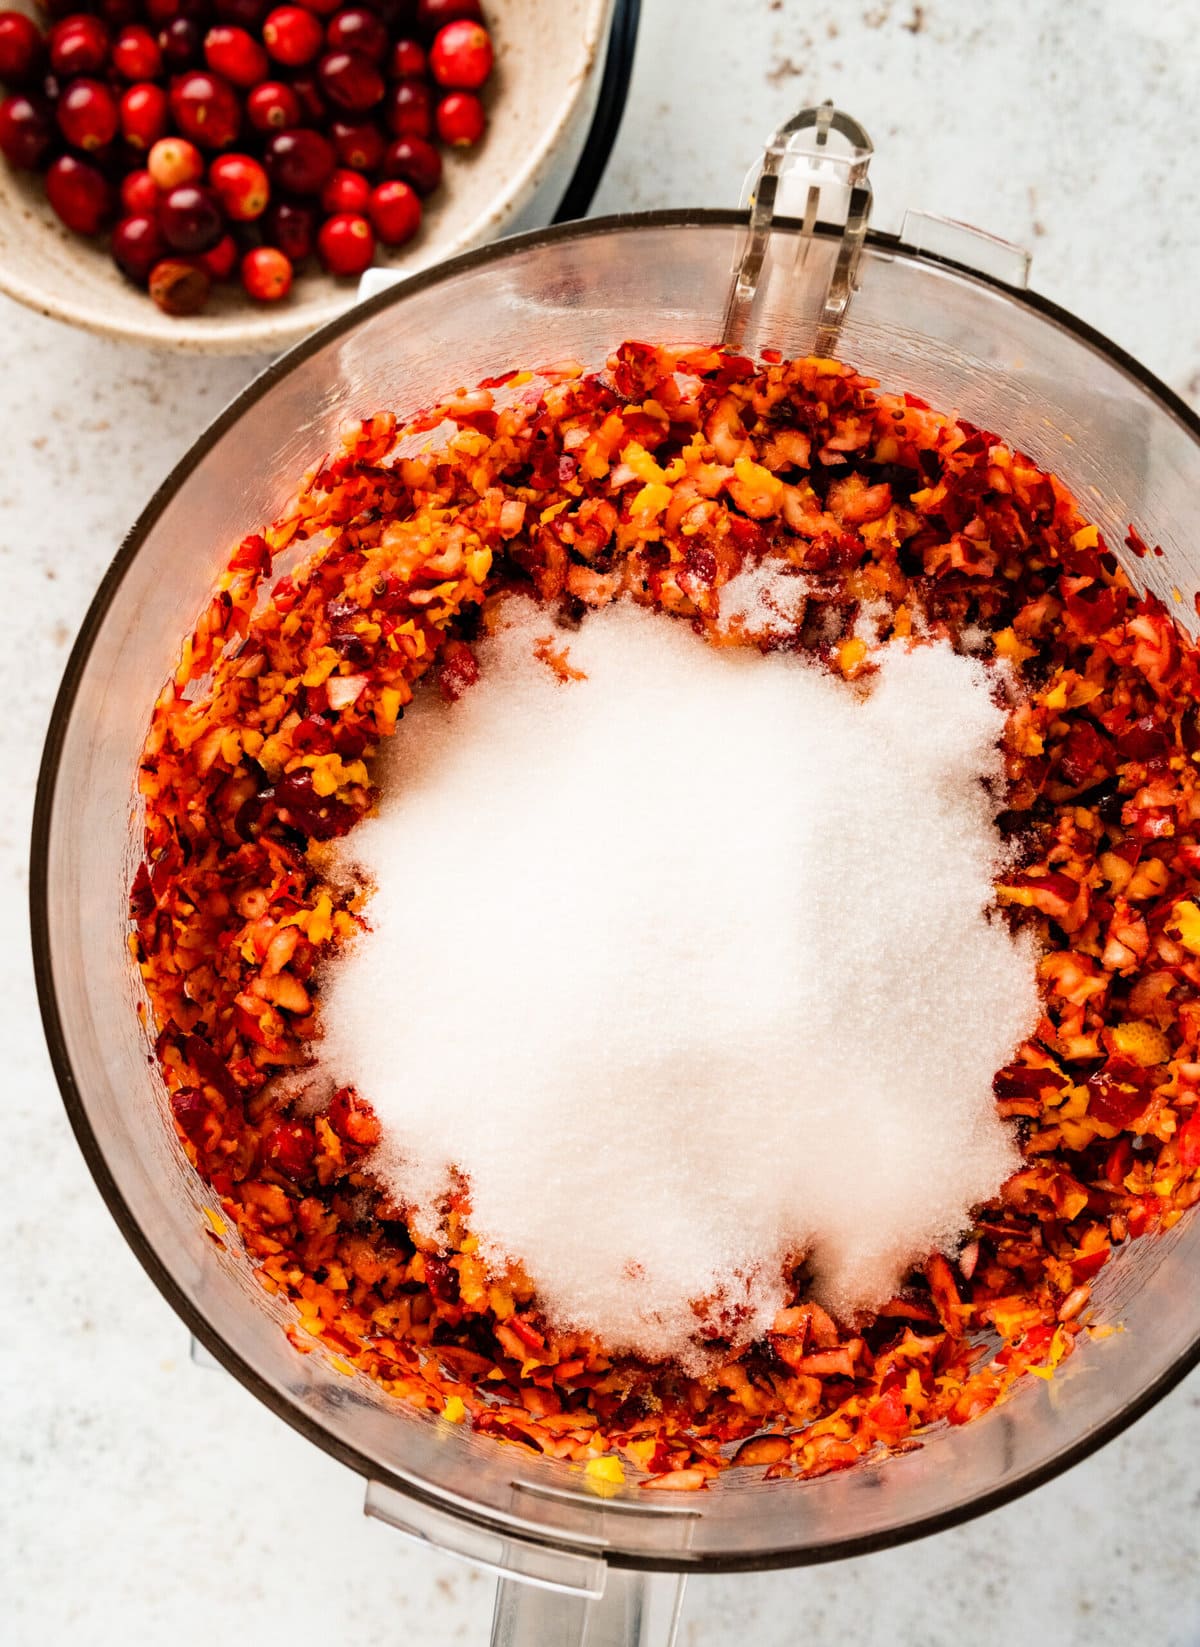 How to make easy fresh cranberry relish step-by-step: adding sugar to the oranges and cranberries in the food processor.